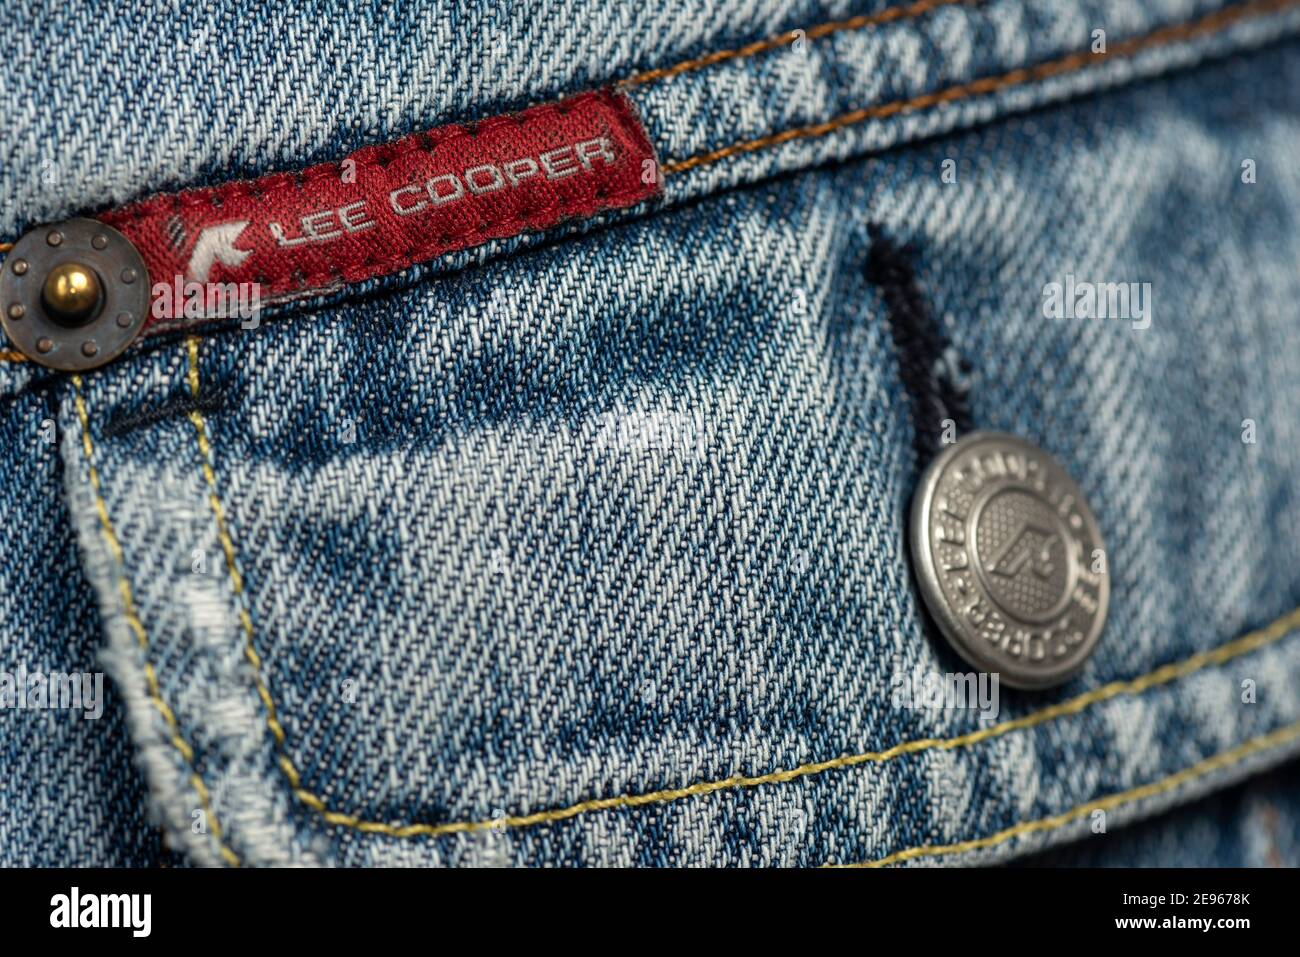 Lee Jeans Logo High Resolution Stock Photography and Images - Alamy